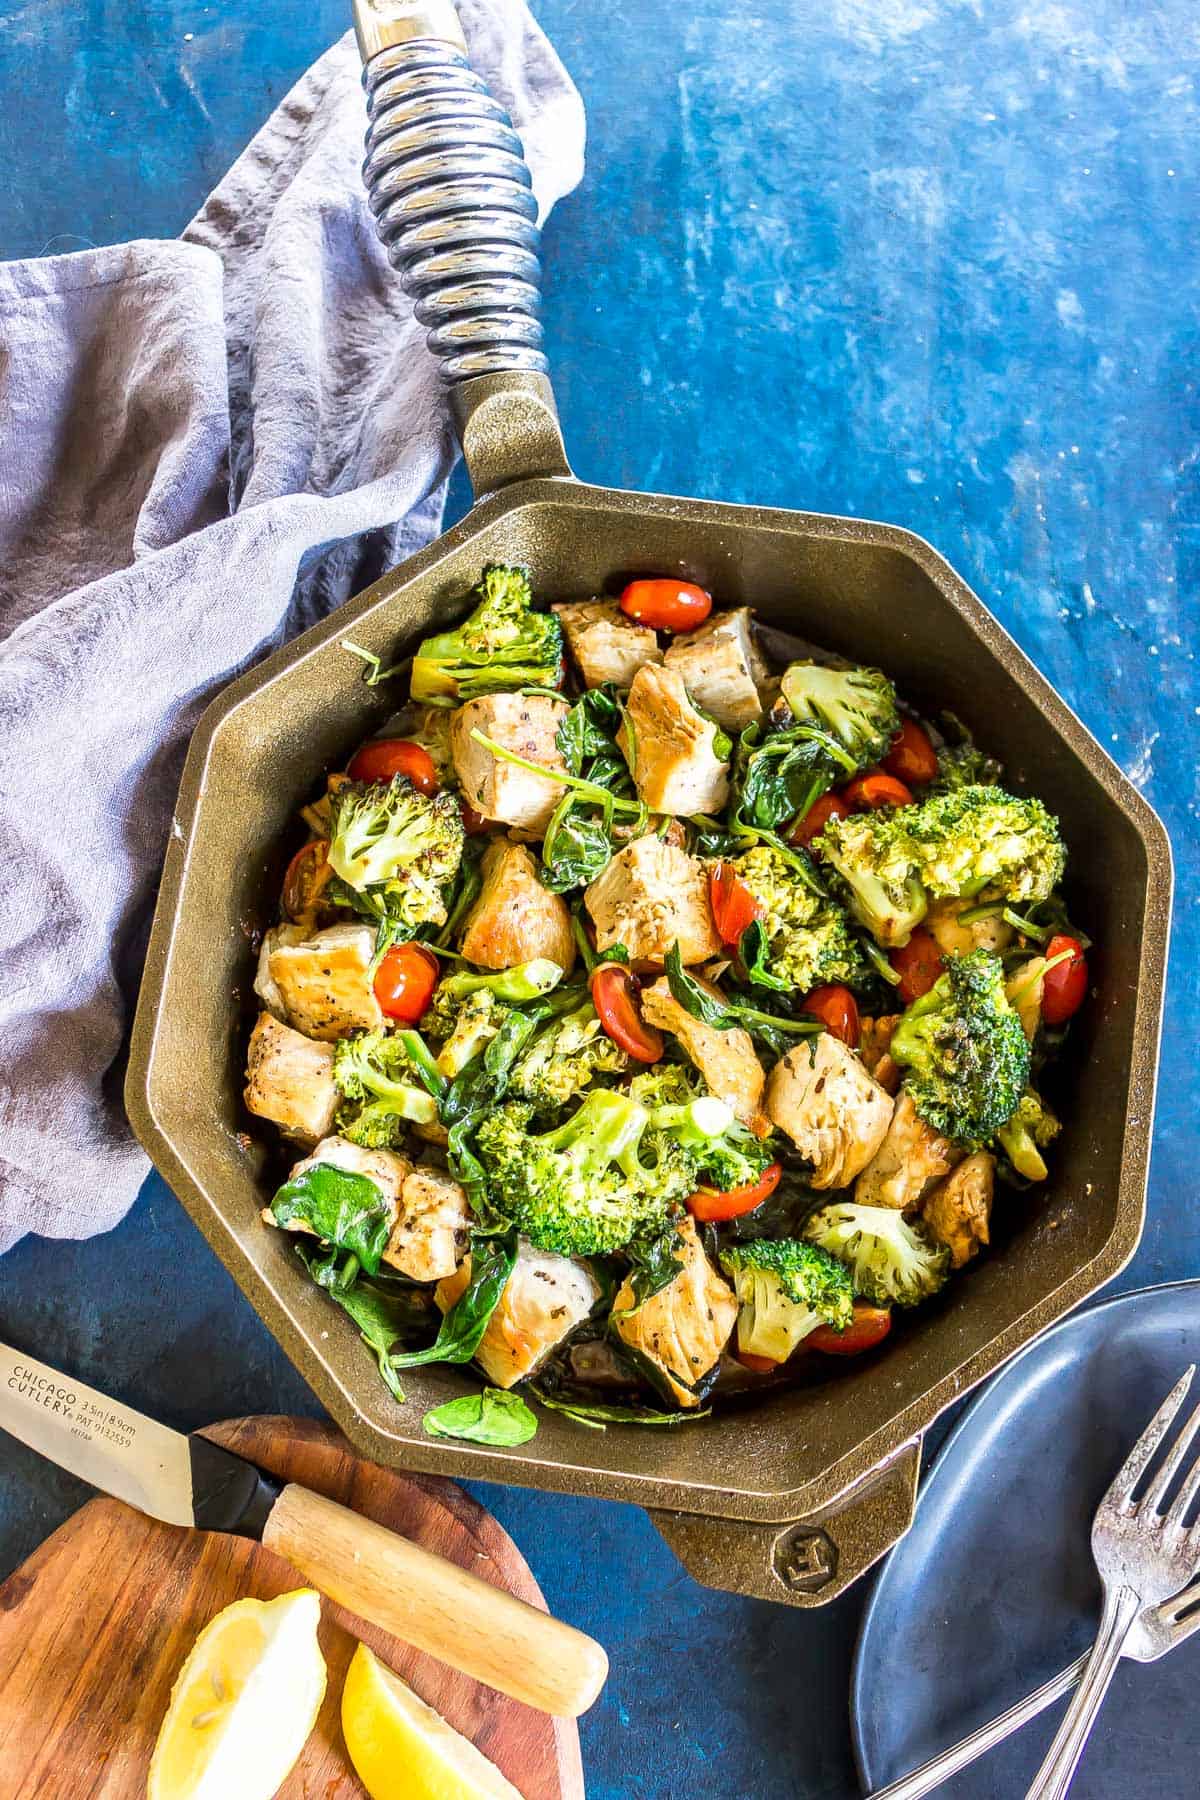 Keto Italian Chicken Skillet (cubed chicken, broccoli, cherry tomatoes and sauce) in a finex cast iron skillet.